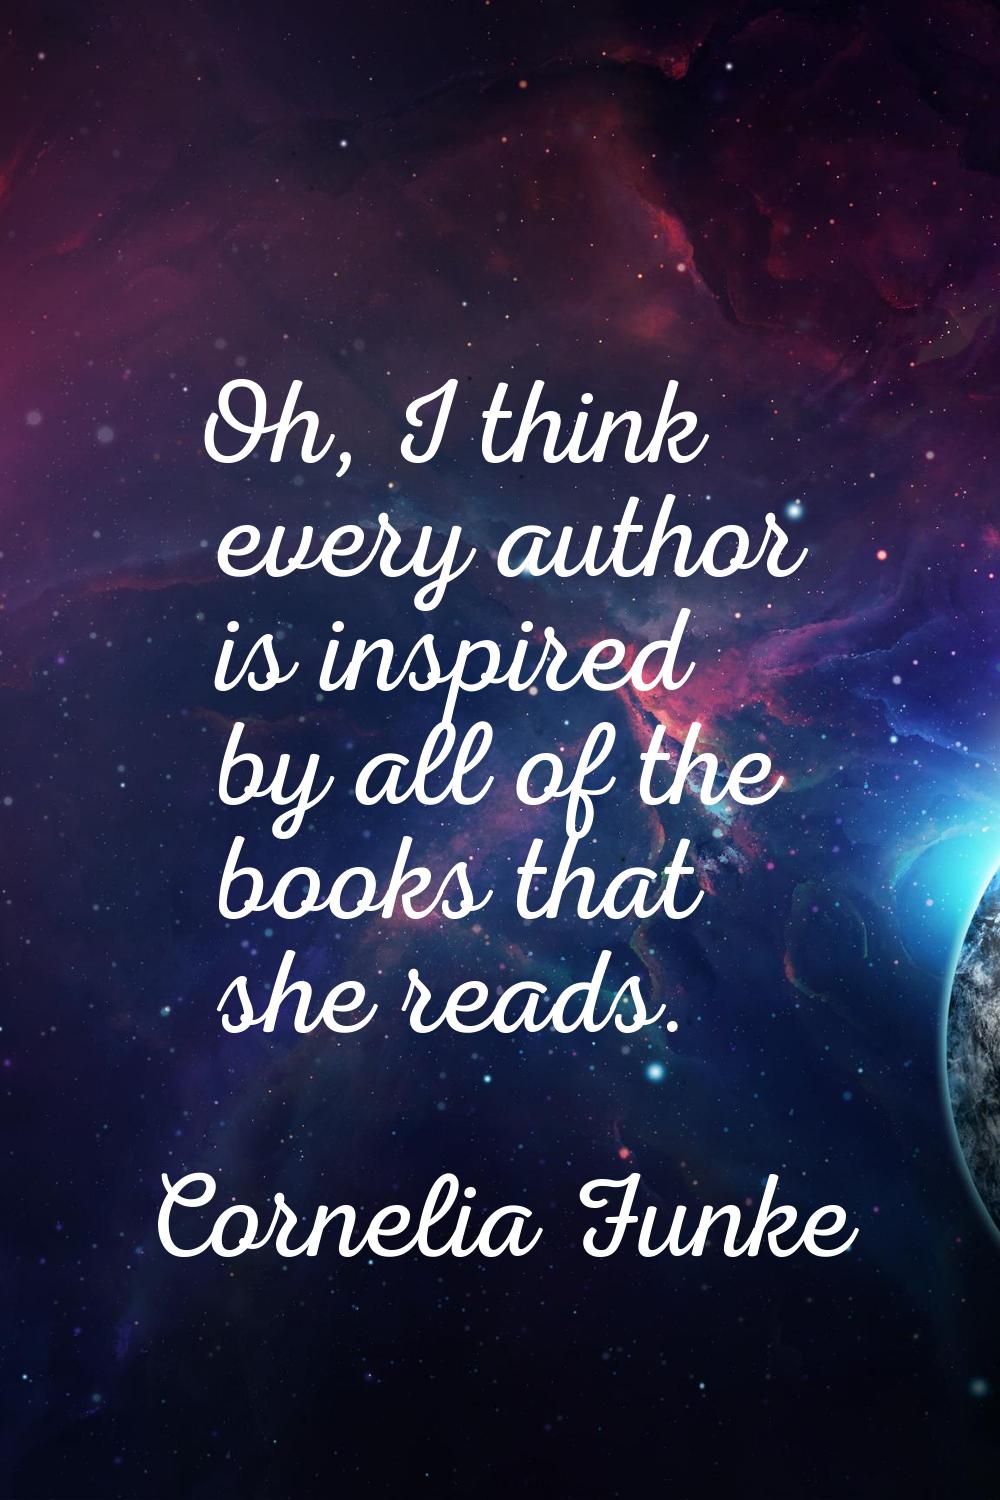 Oh, I think every author is inspired by all of the books that she reads.